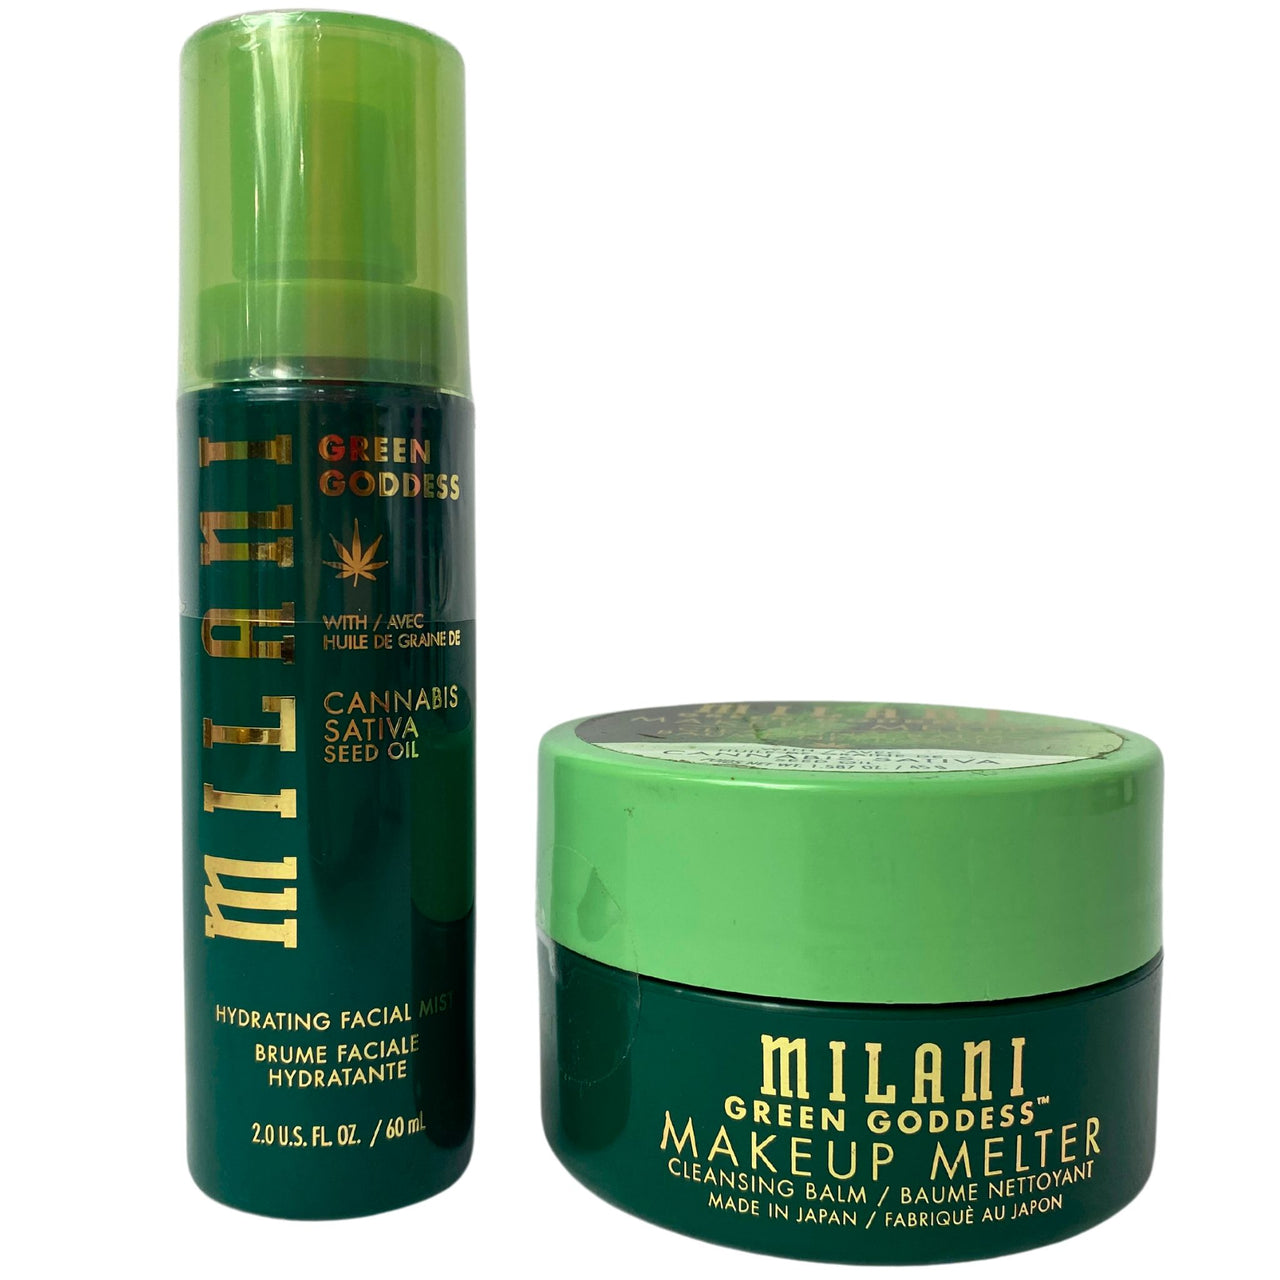 Milani Green Goddess Cannabis Sativa Seed Oil Hydrating Facial Mist & Makeup Melter Cleansing Balm 